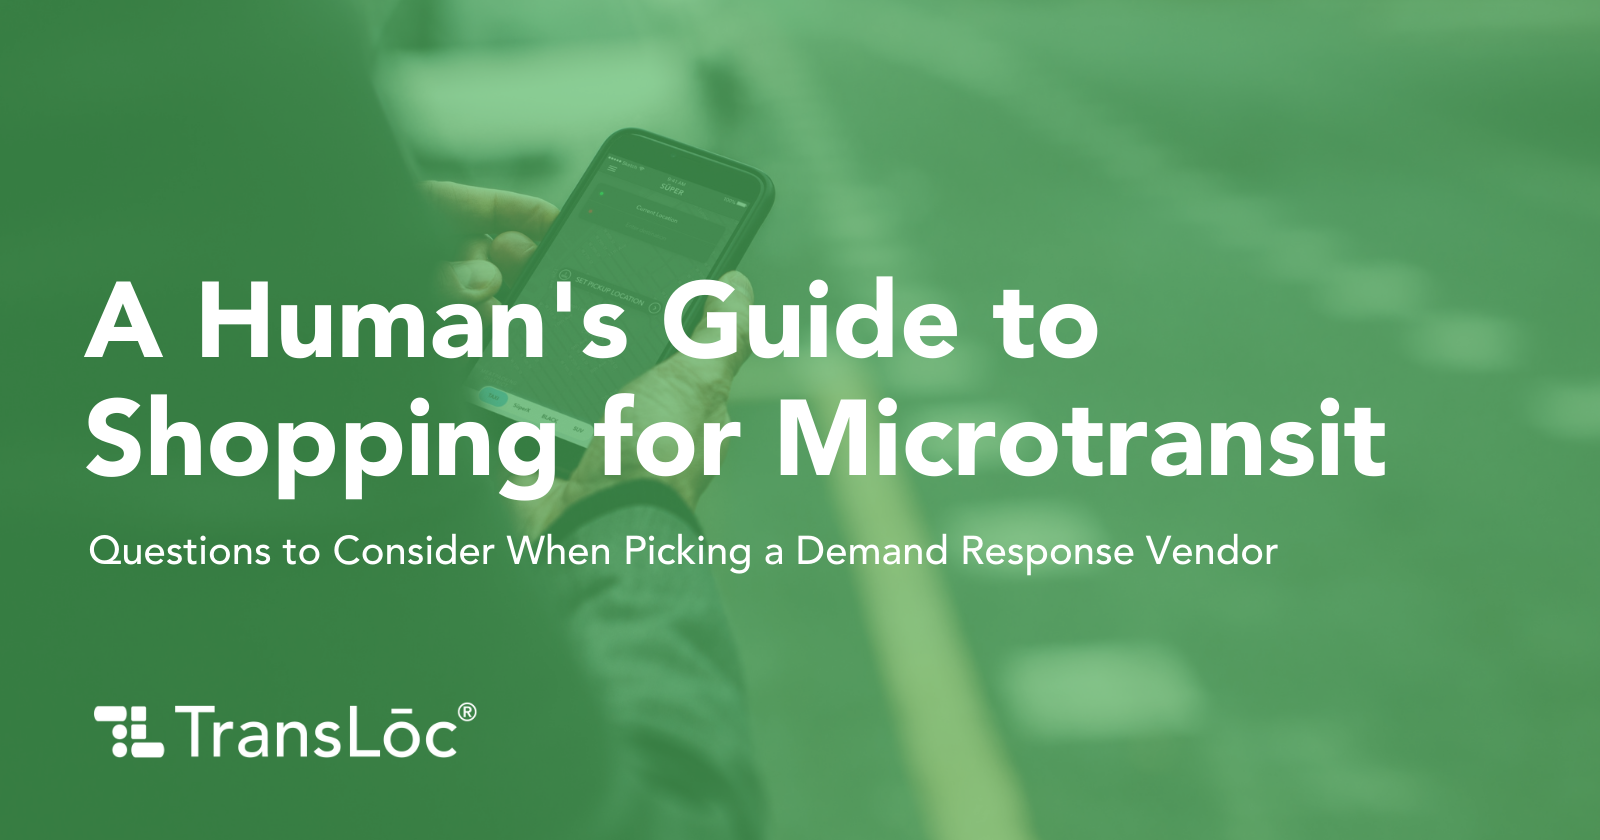 Microtransit Shopping Guide